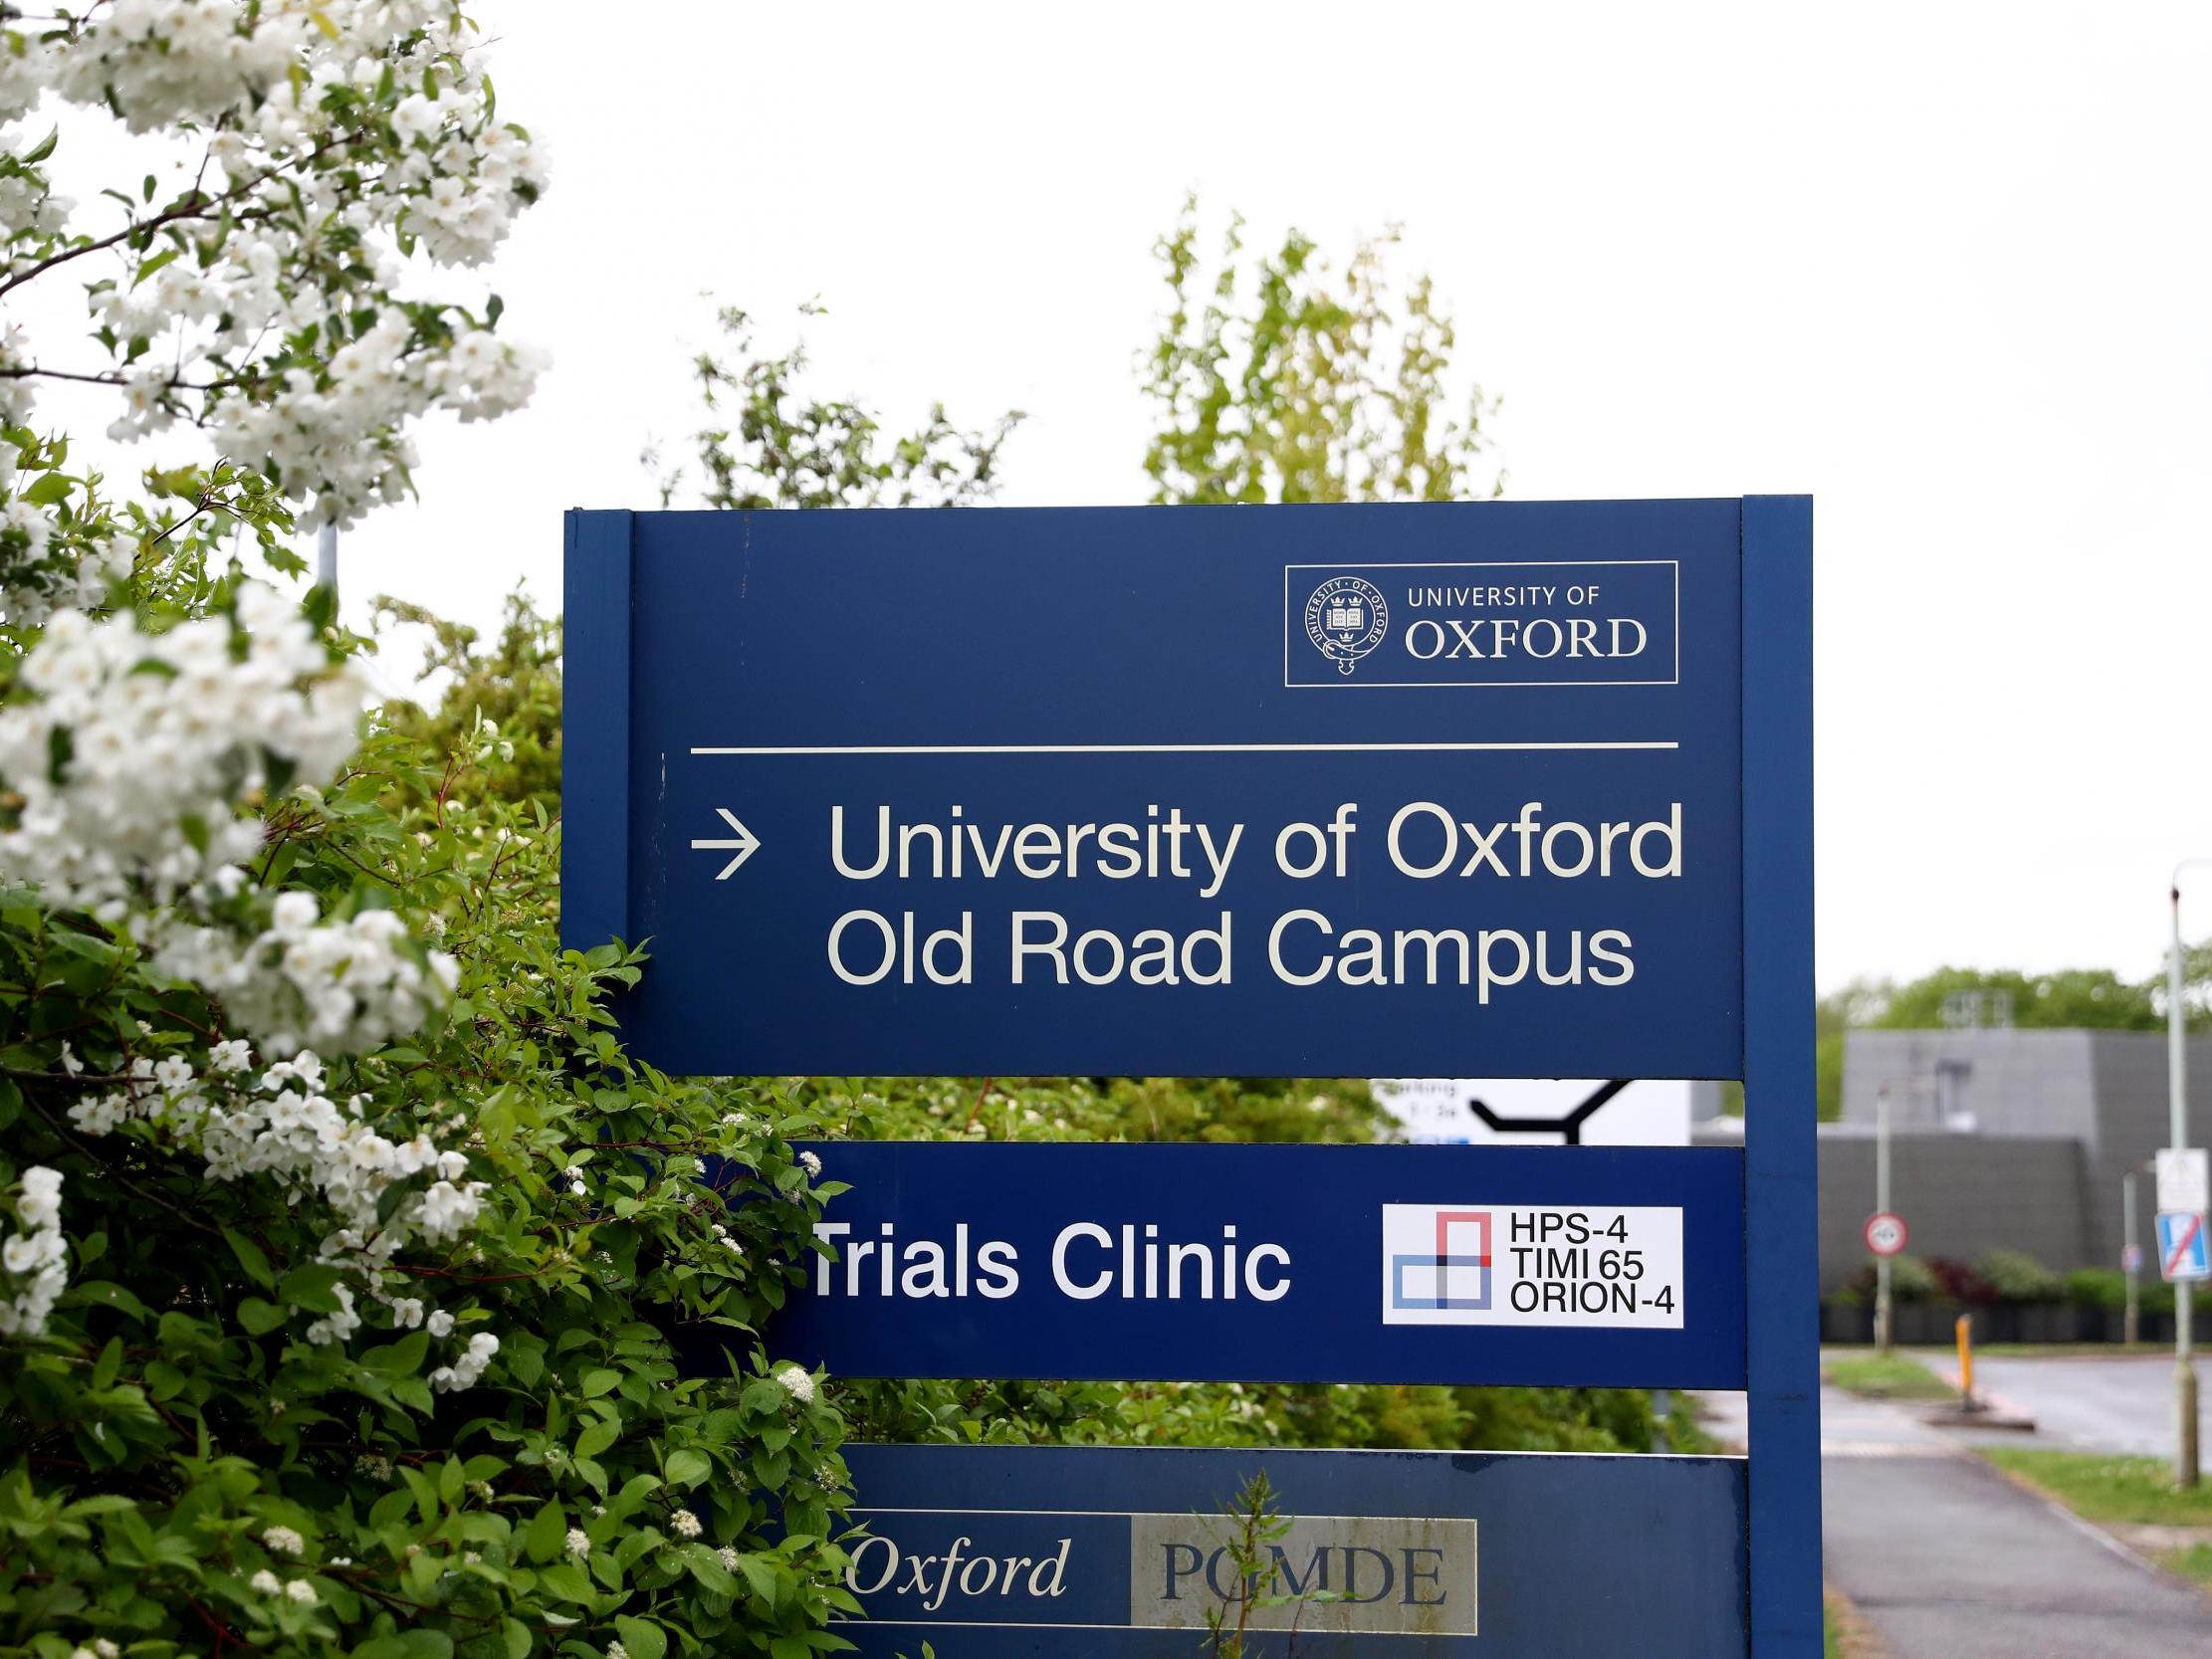 The University of Oxford is leading the race to develop a Covid-19 vaccine